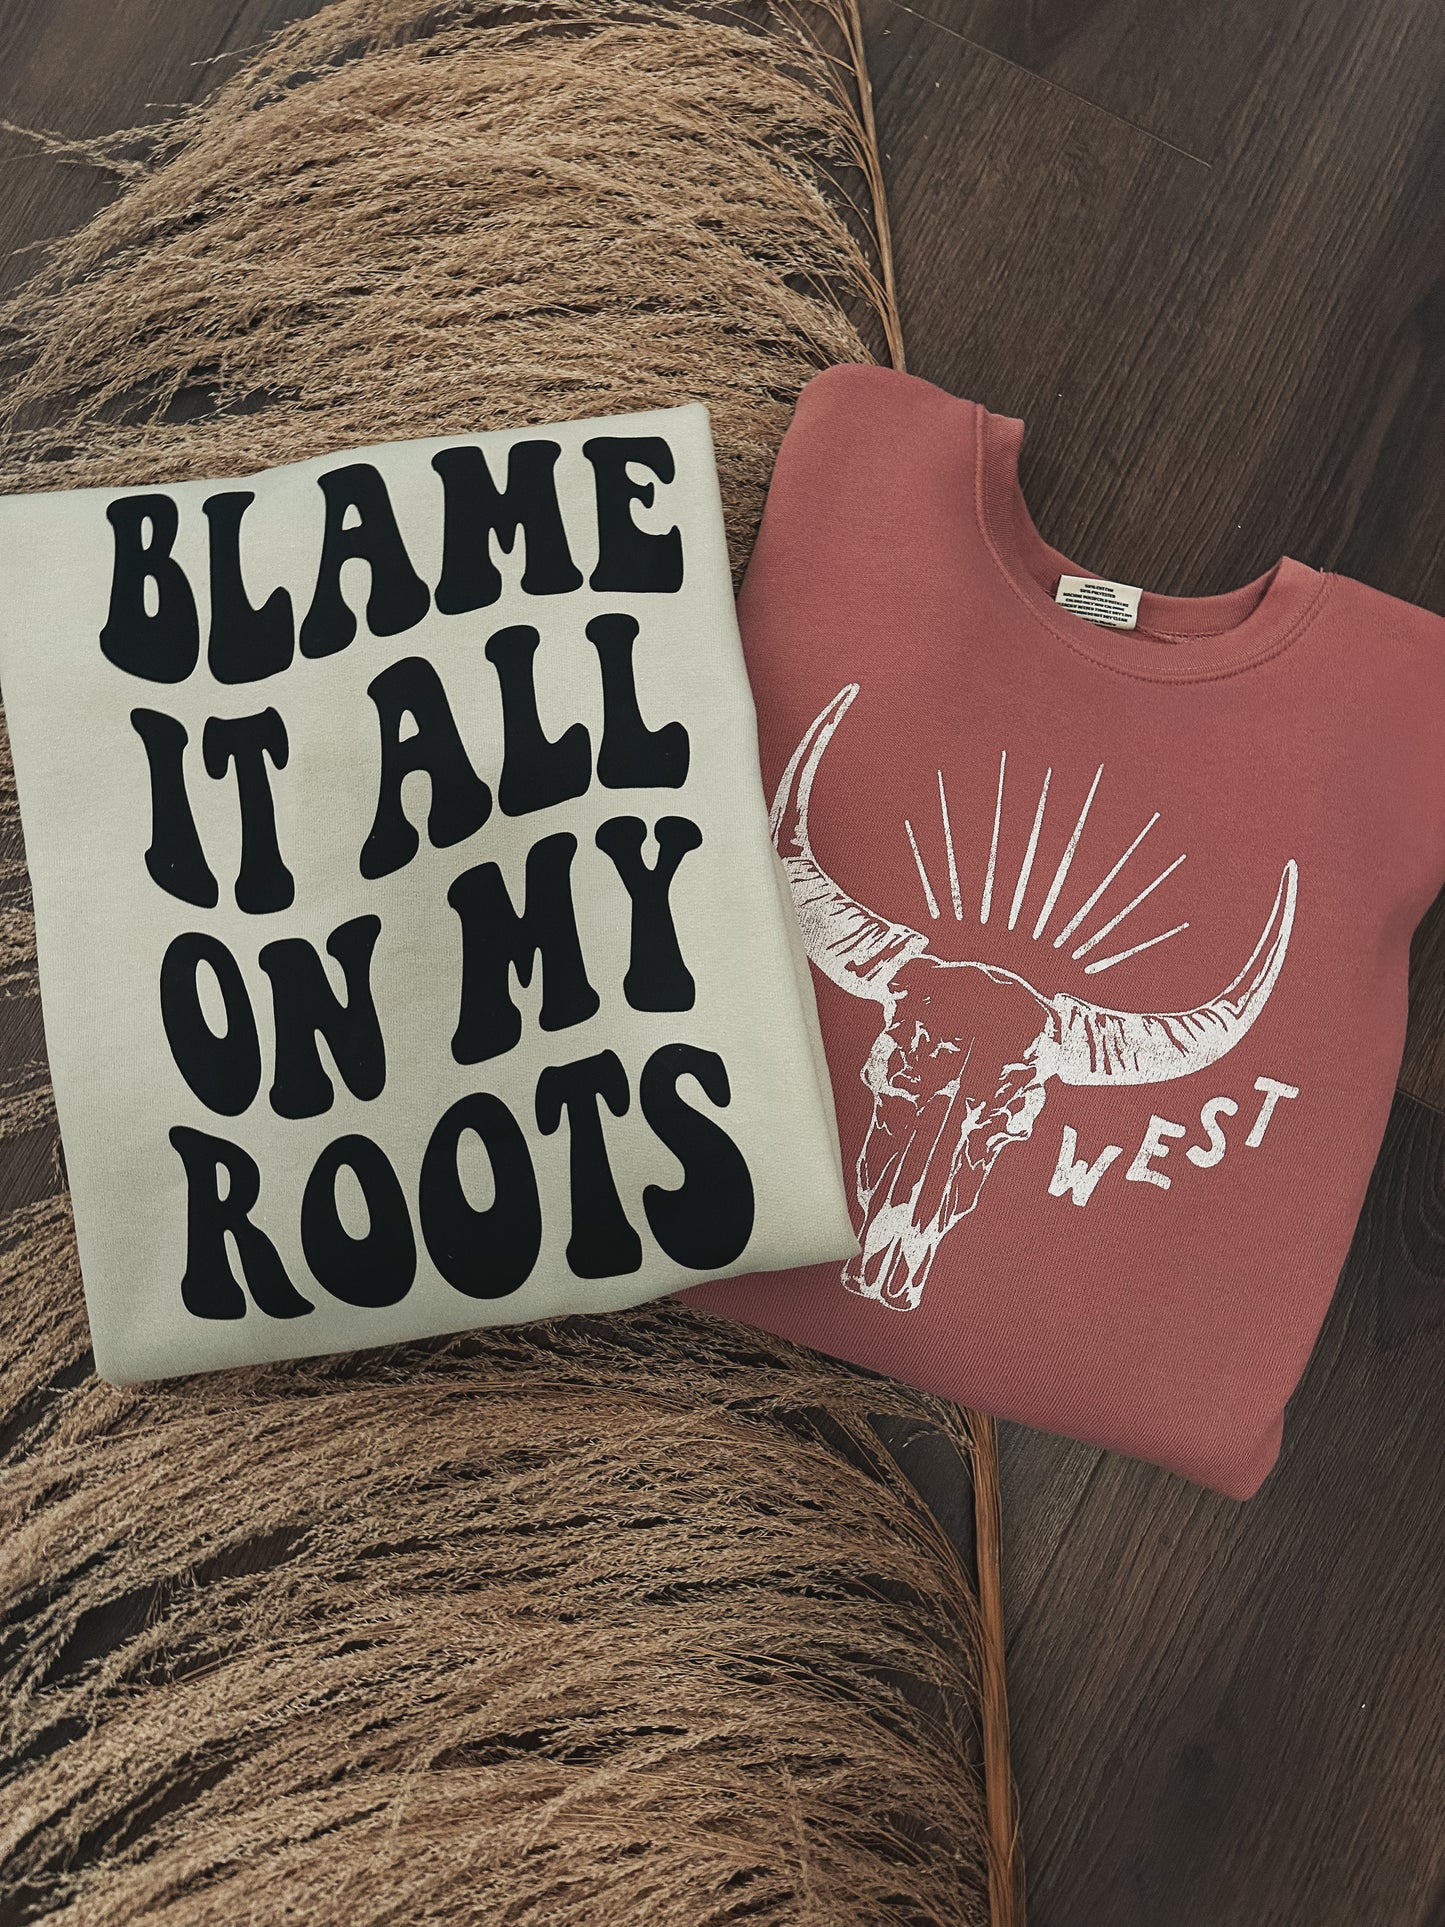 Blame It All On My Roots Crewneck